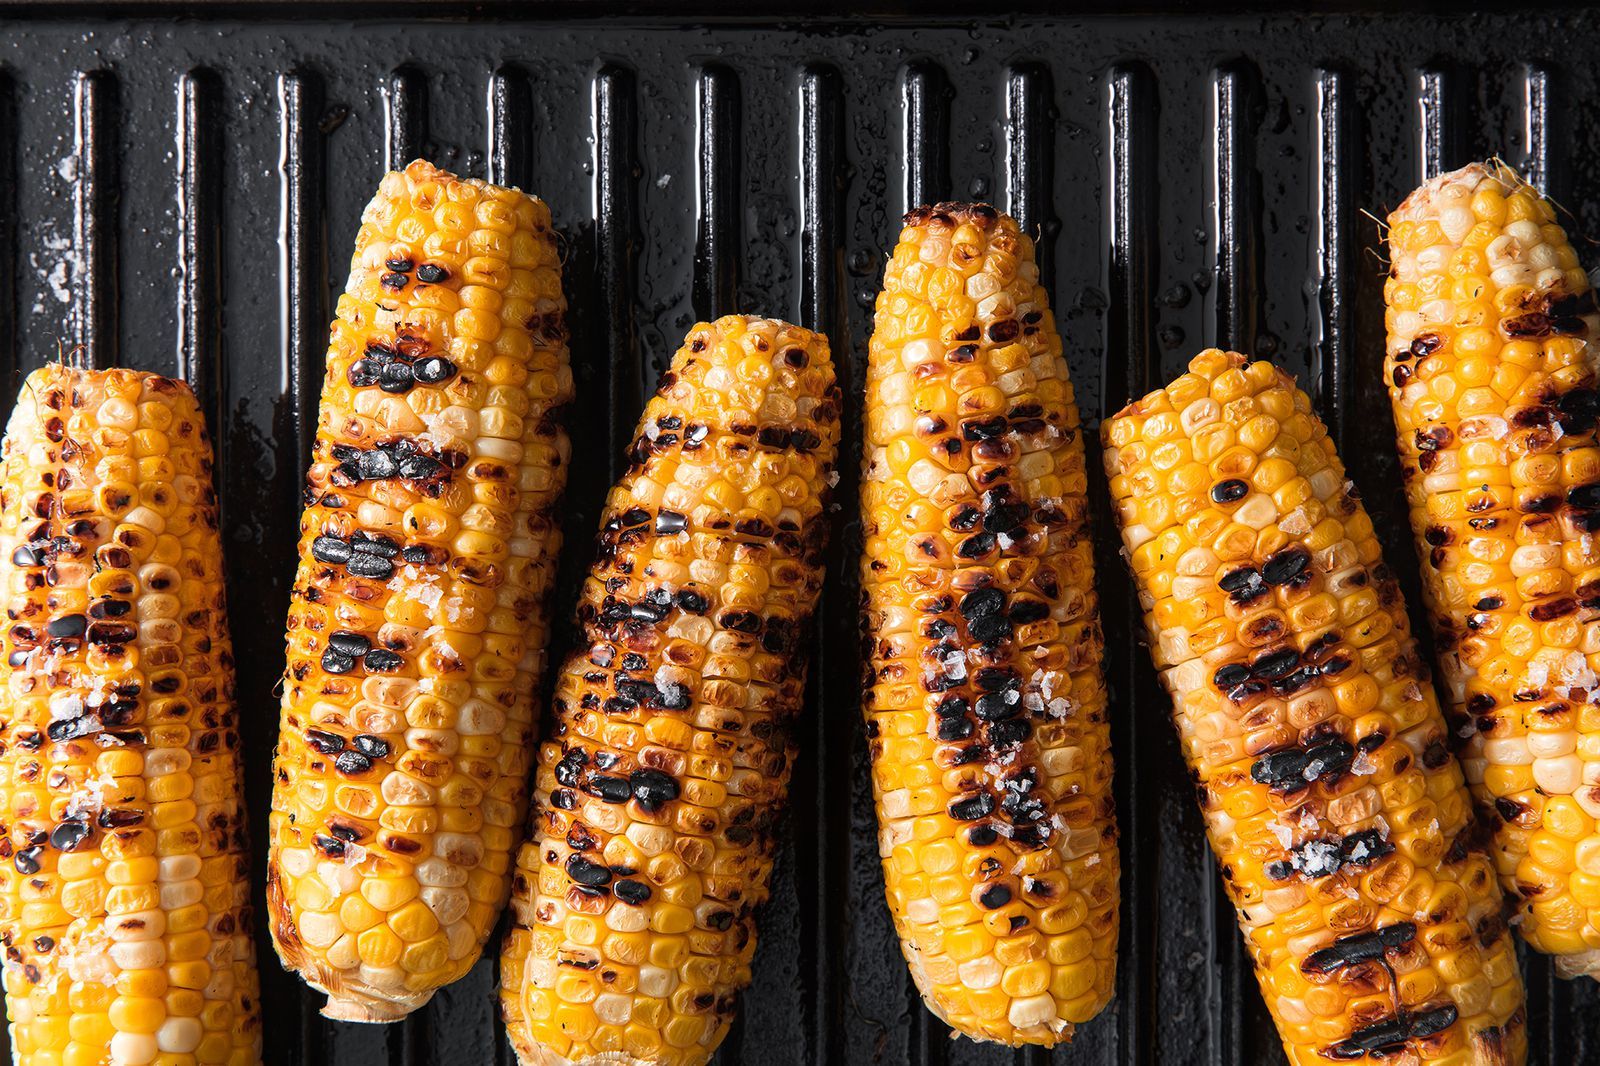 Summer Staple: How To Grill Corn On The Cob For Your Next Backyard BBQ